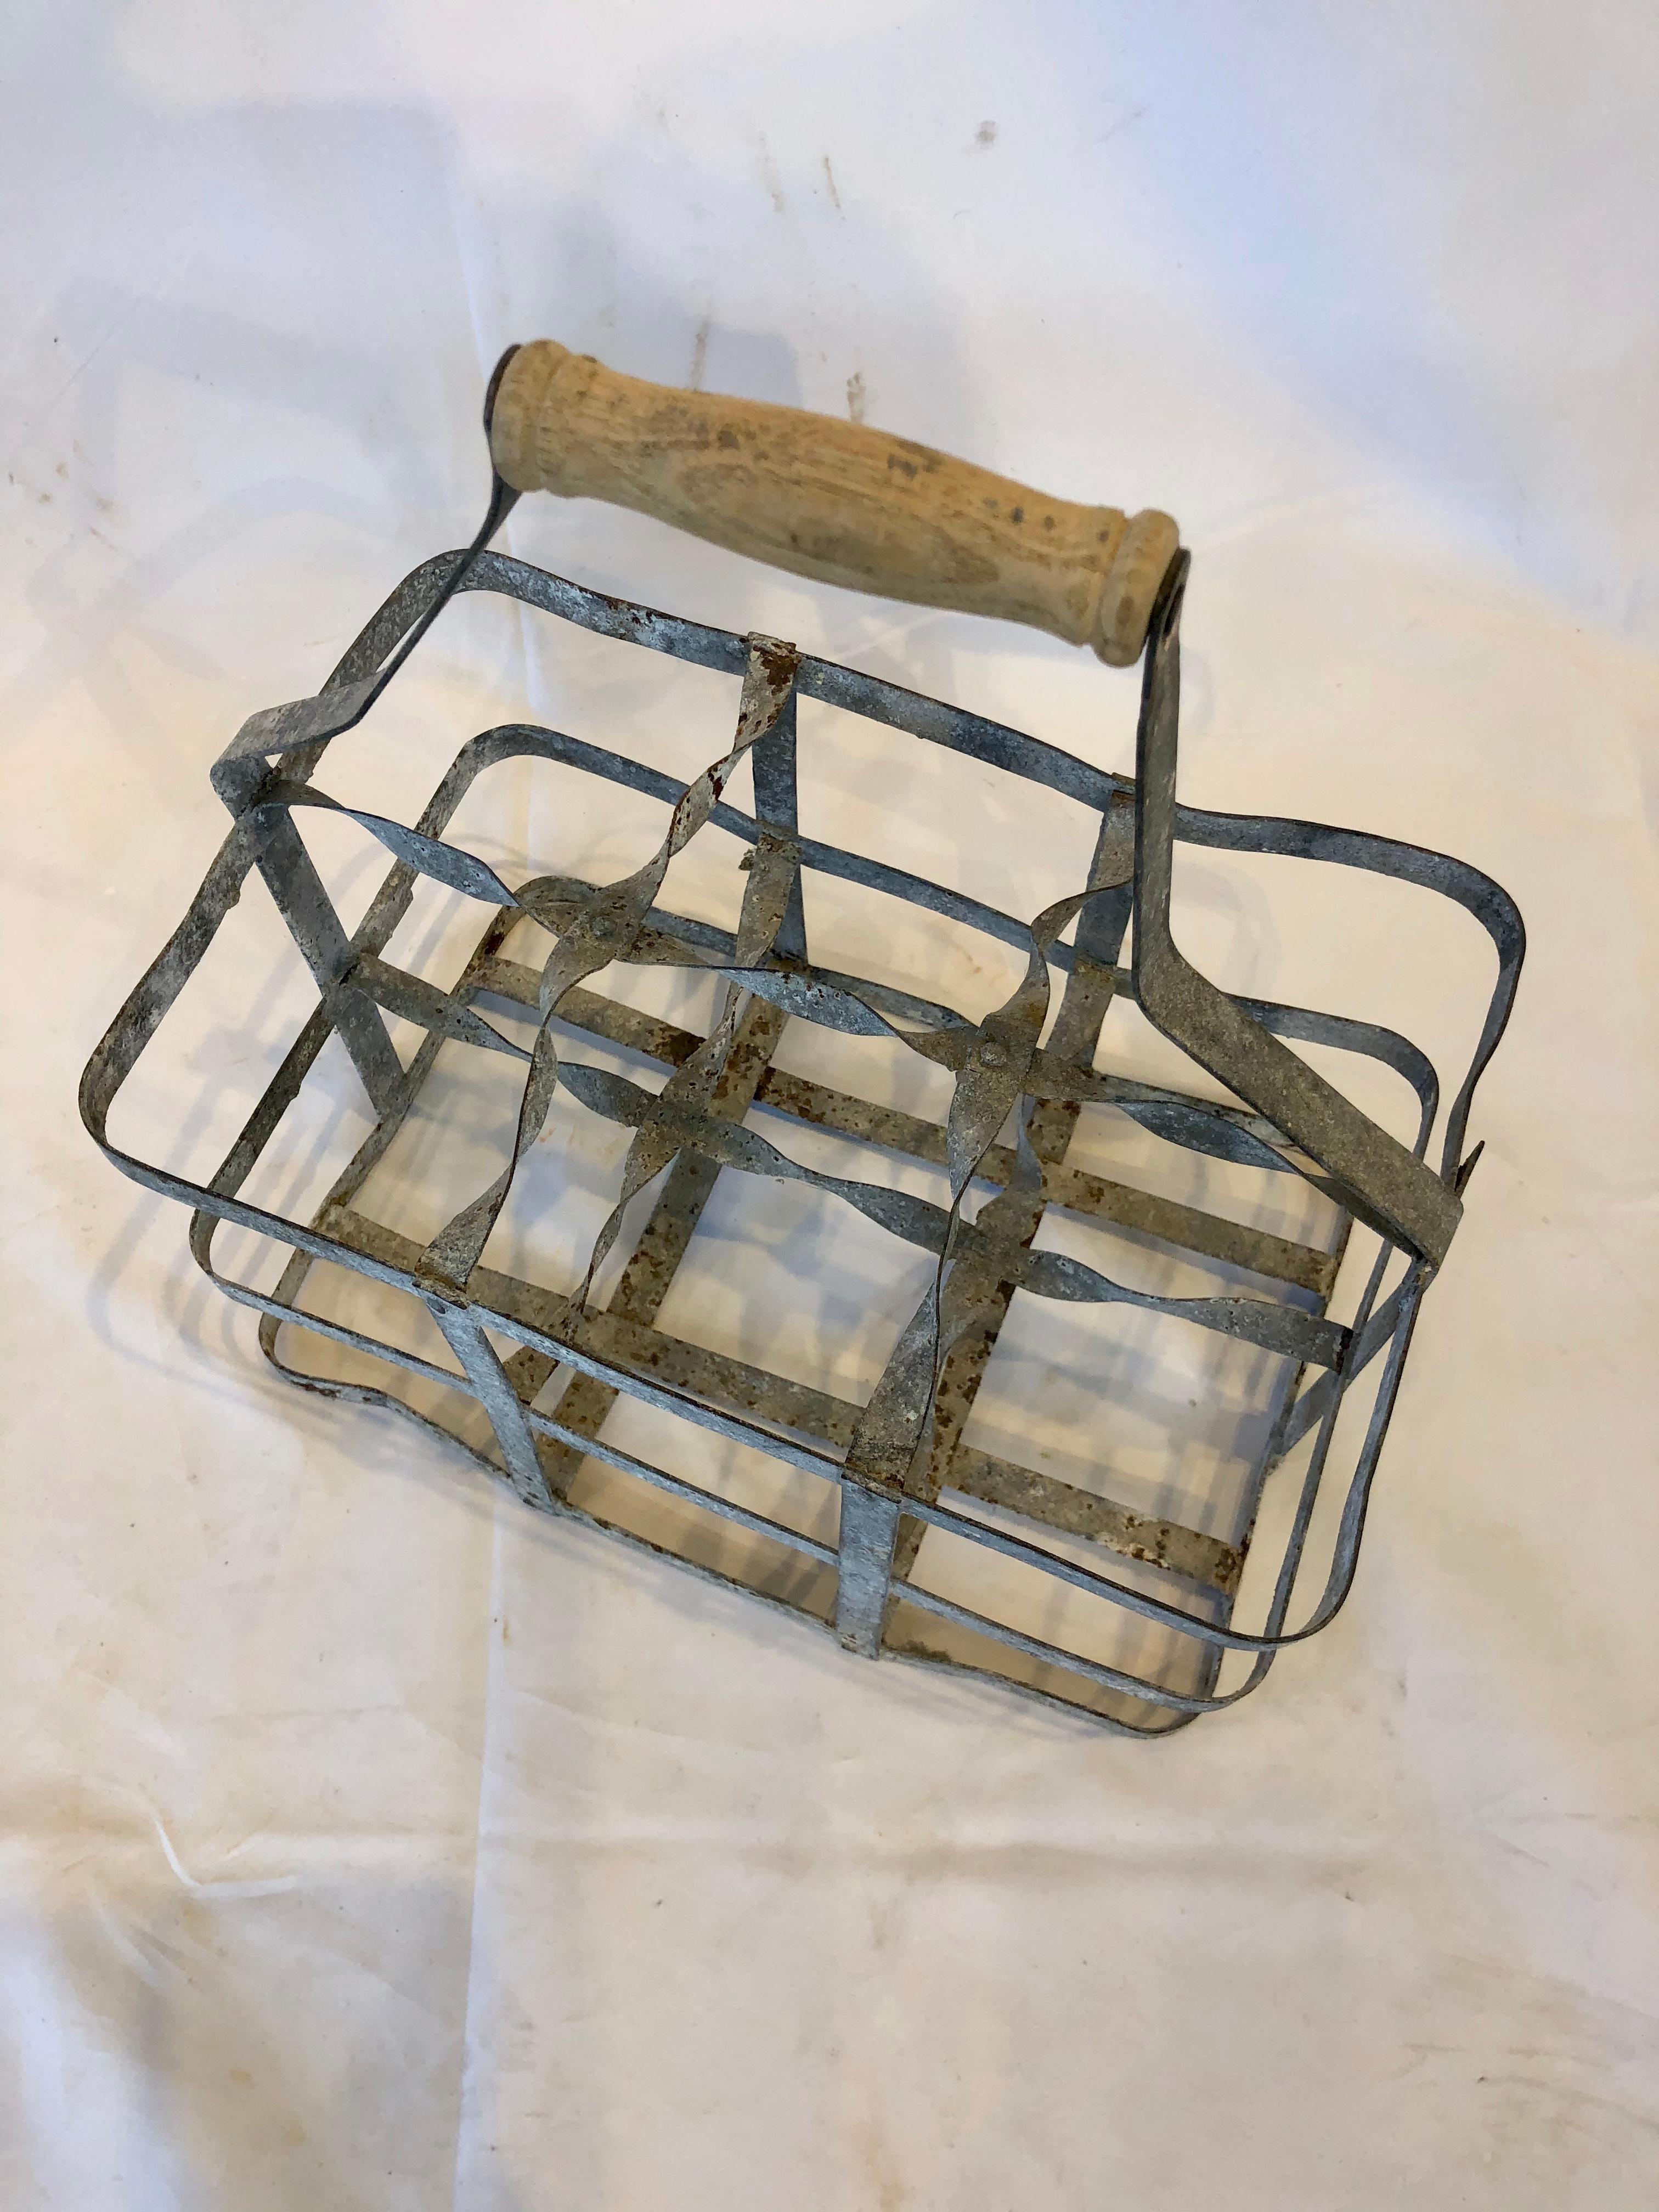 Early 20th century vintage French six bottle wine carrier basket from France. Antique french handmade wine bottle carrier rack for 6 bottles, made of metal with a wooden handle. Used by the french for carrying wine bottles when going to the wine